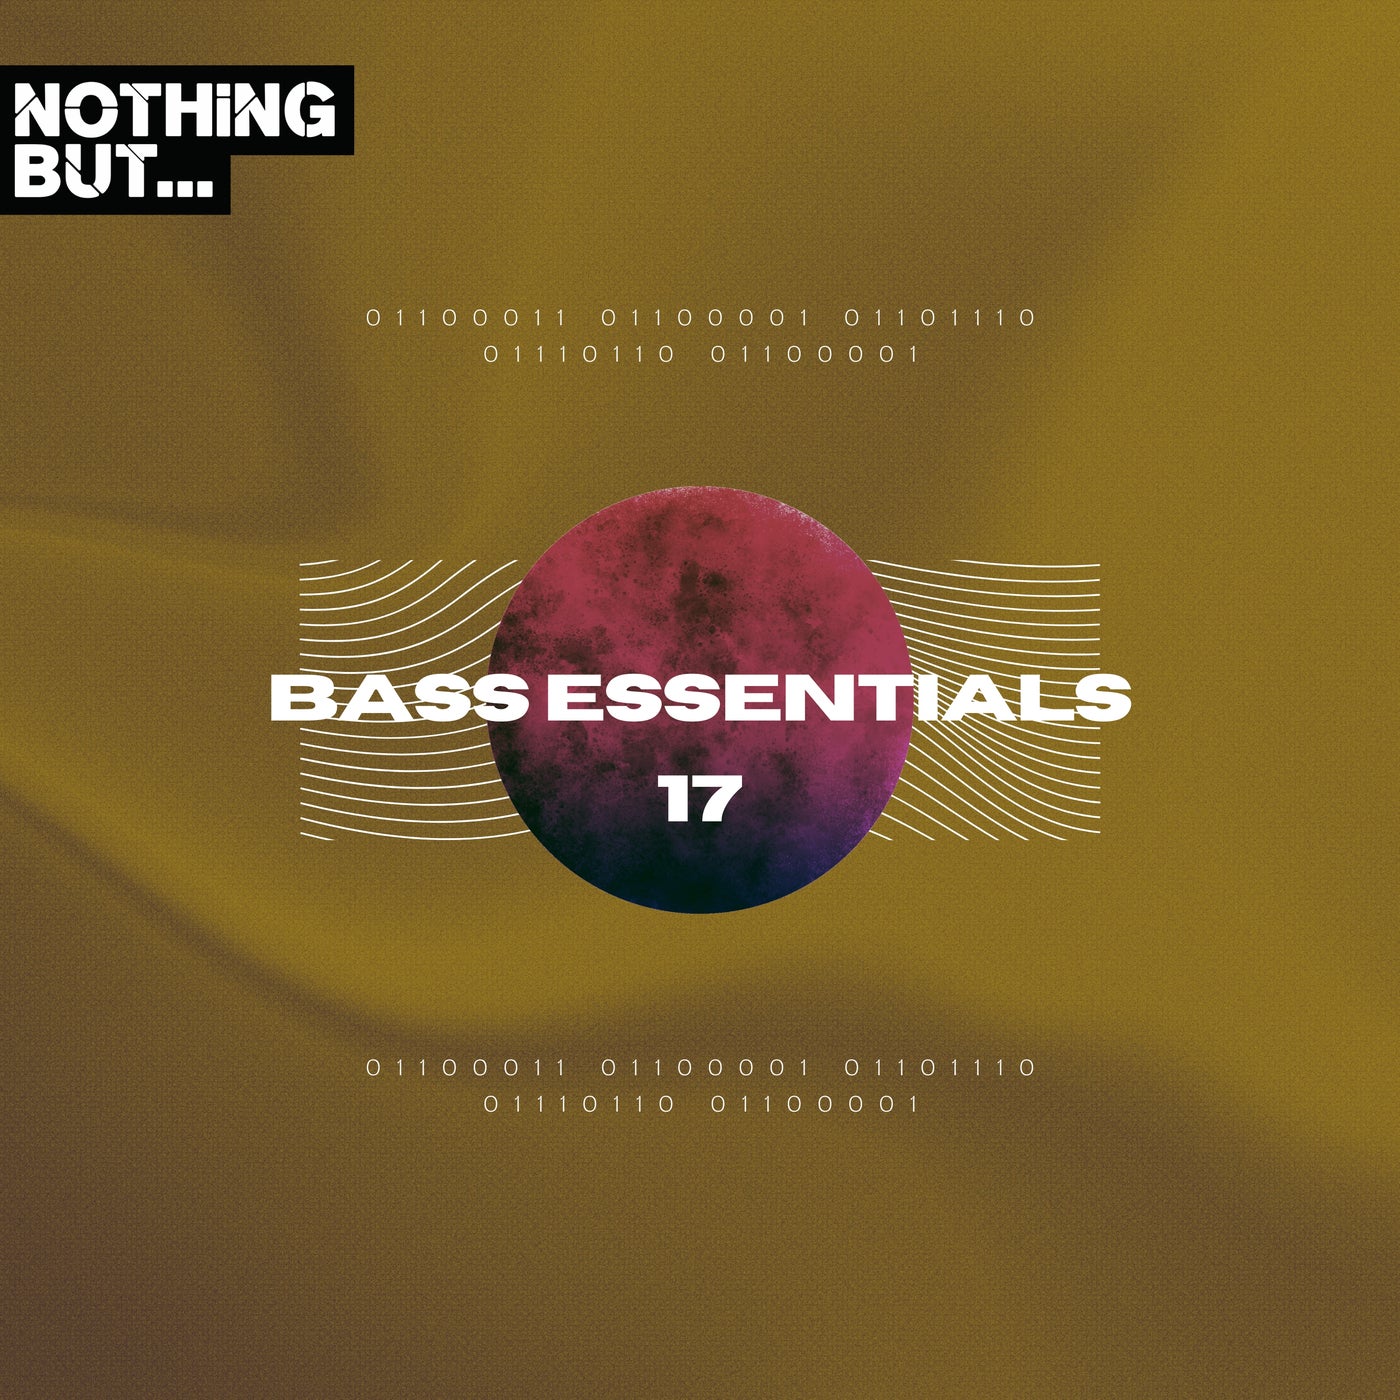 Nothing But... Bass Essentials, Vol. 17